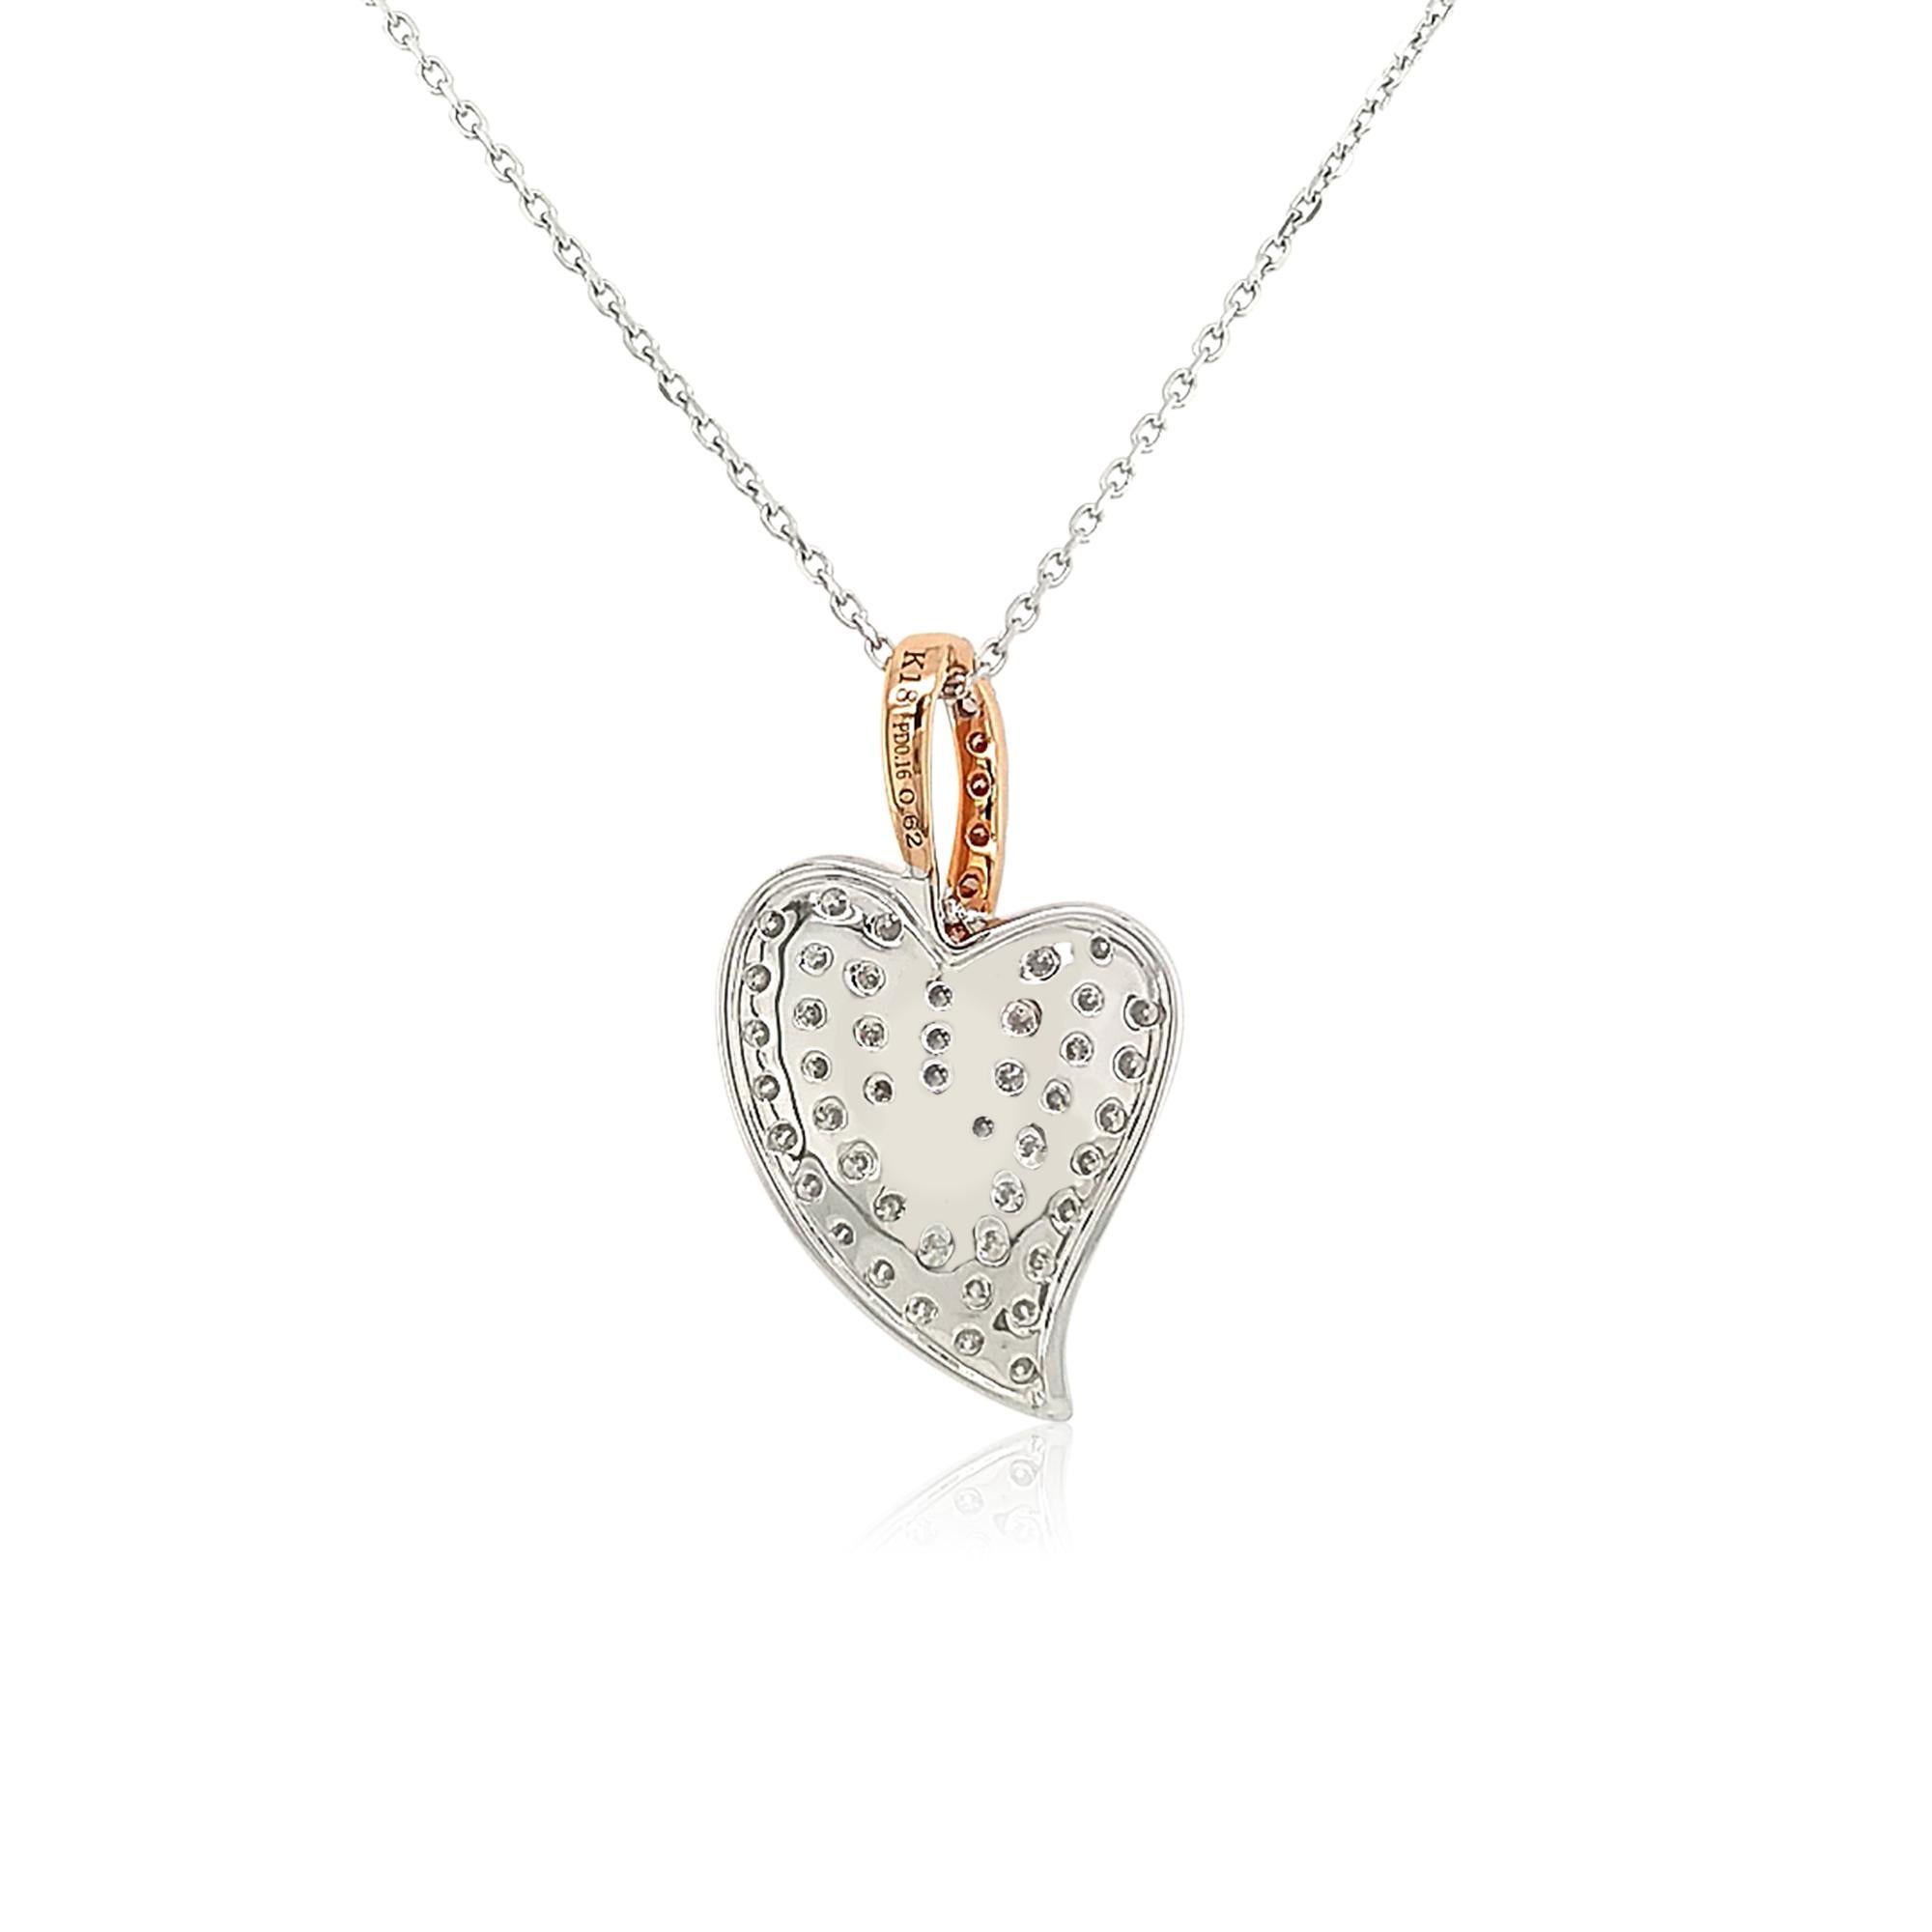 A feminine delight, this pretty pendant features tastefully combined shades of natural Argyle Pink diamonds and sparkling White diamonds, 18K gold in a striking design which is sure to be noticed whichever way you choose to style it.
-	Round